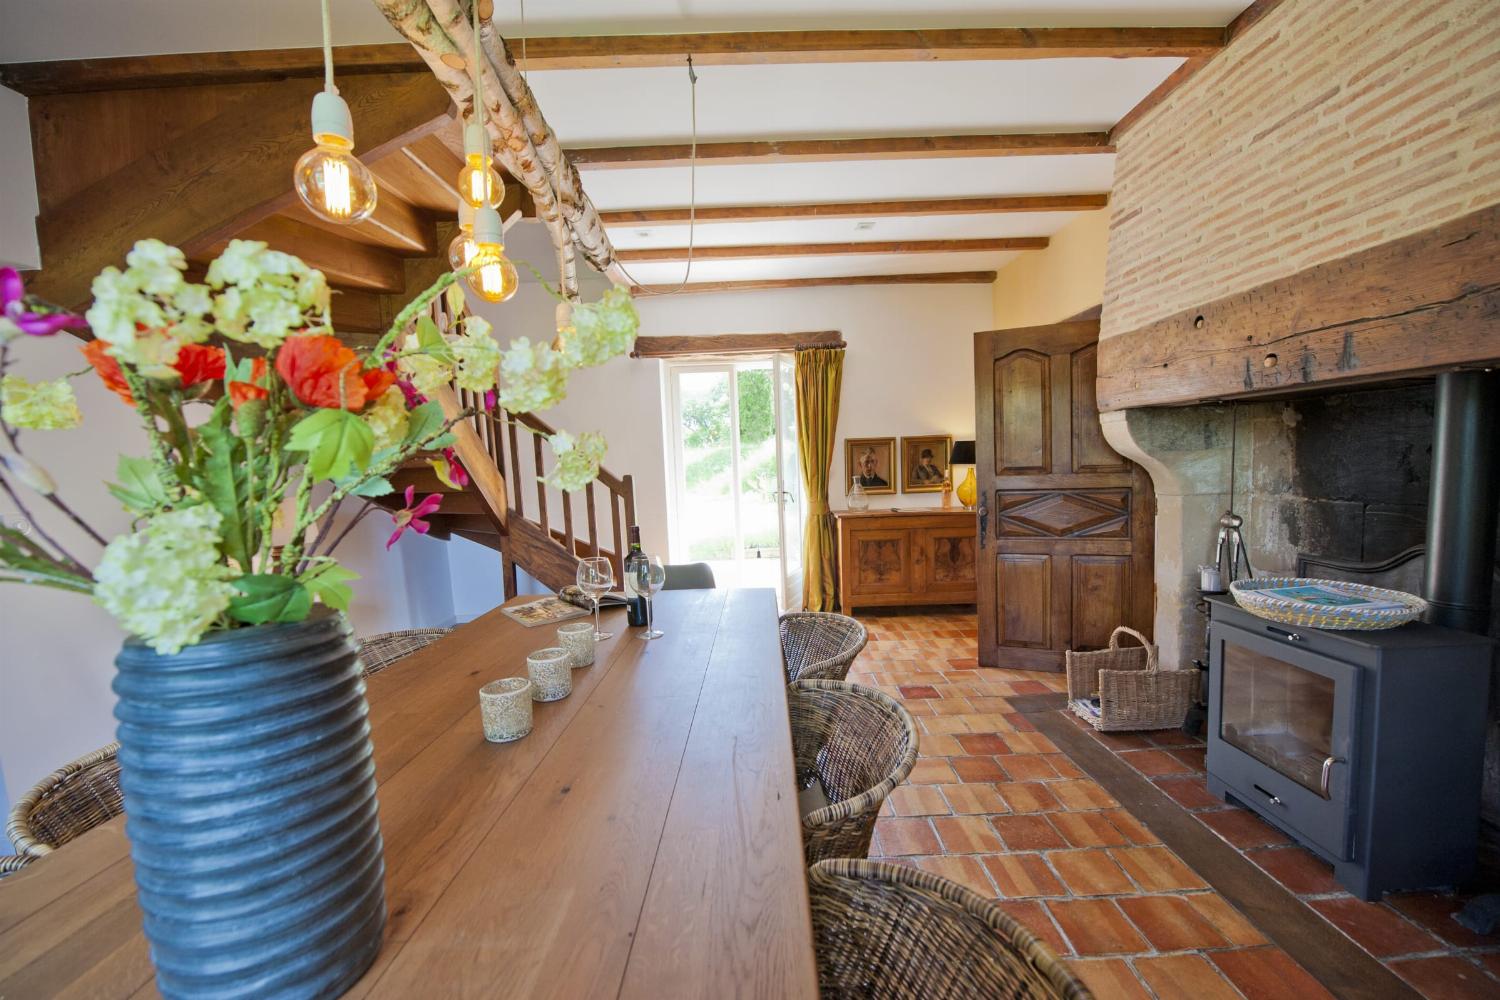 Dining room | Rental accommodation in Nouvelle-Aquitaine